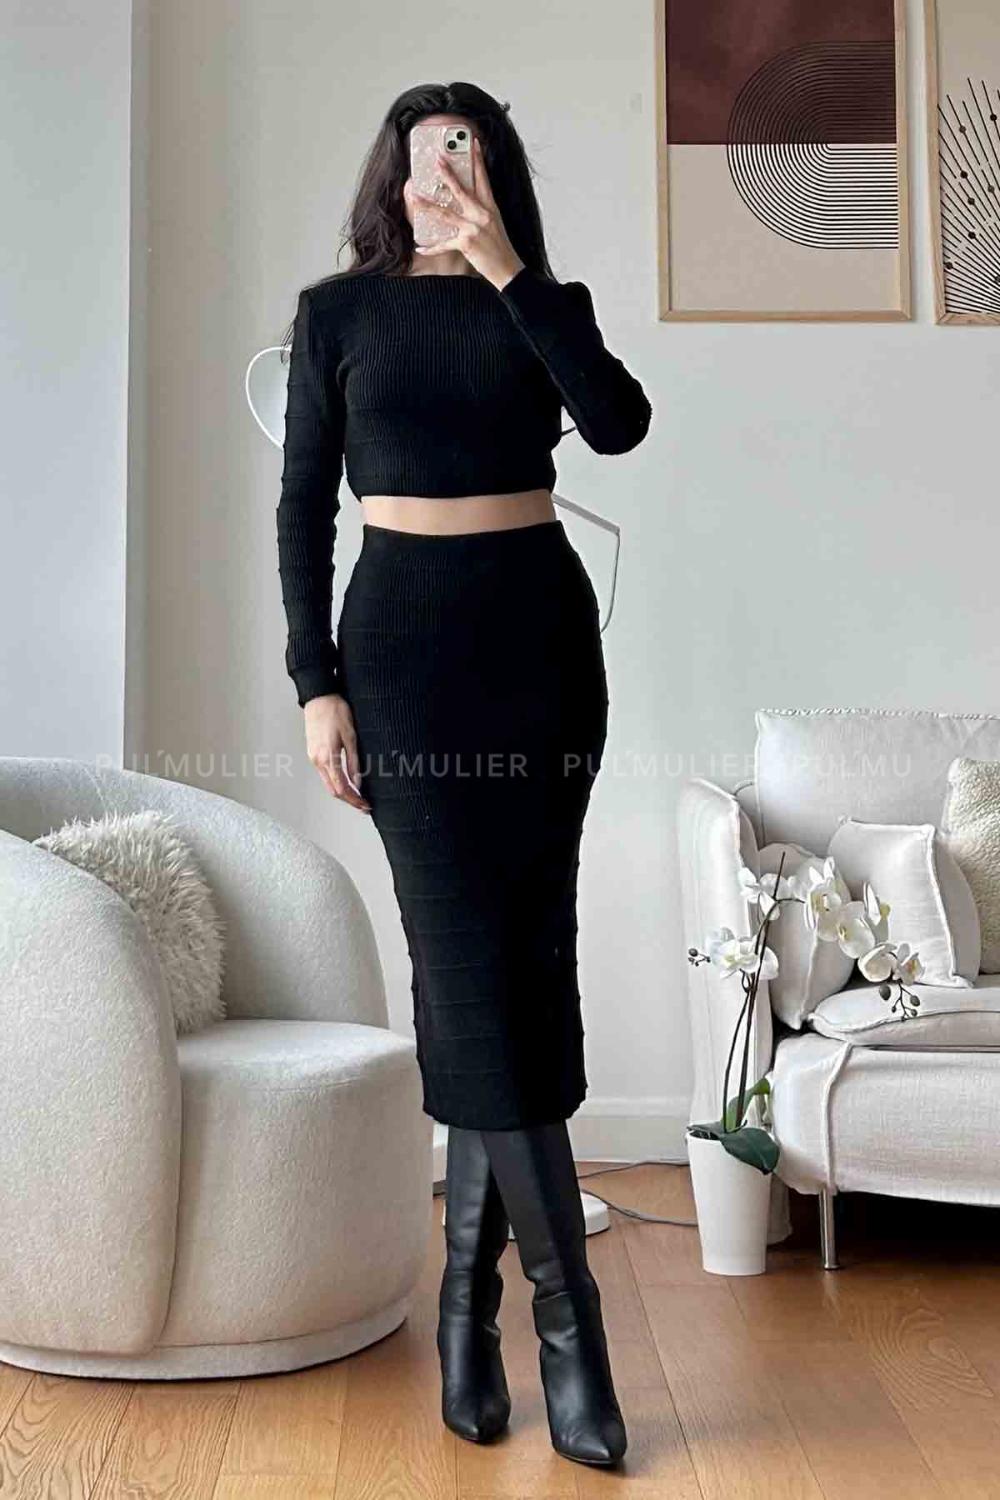 Black Scoop Neck Long Arm Without Accessories Knitwear Regular Trousers Comfortable Suit